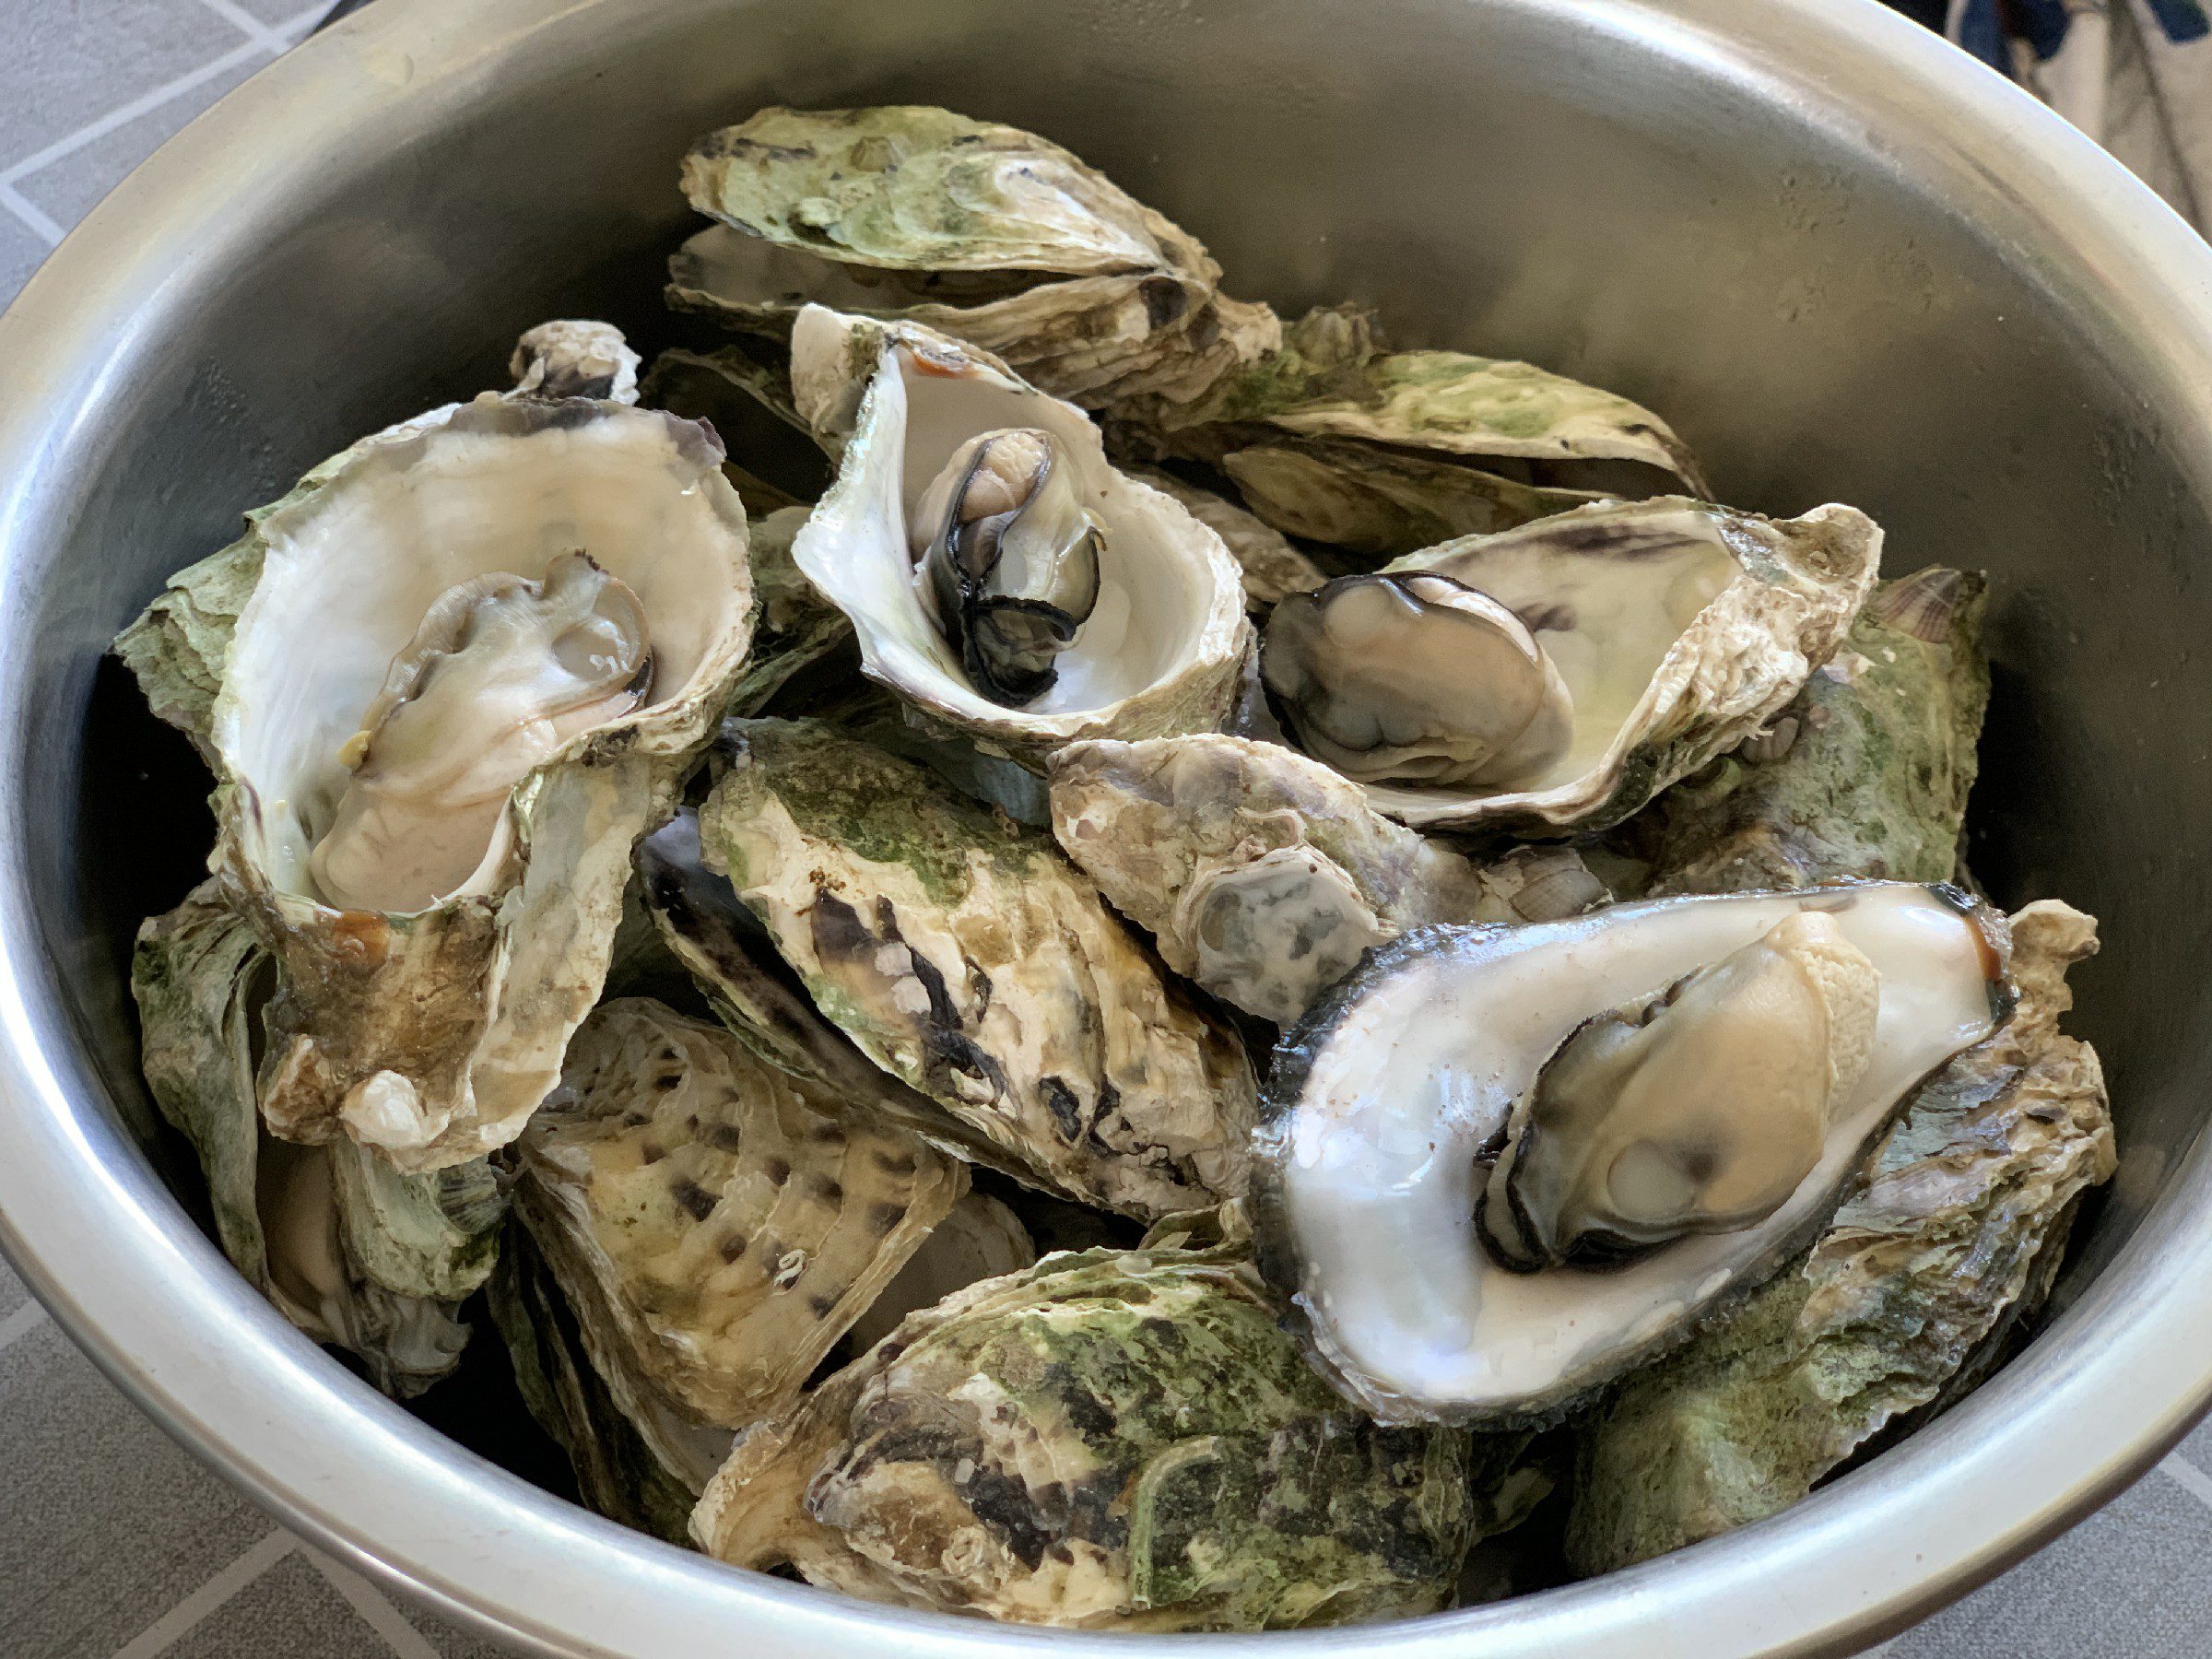 Do oysters need to be cleaned before opening